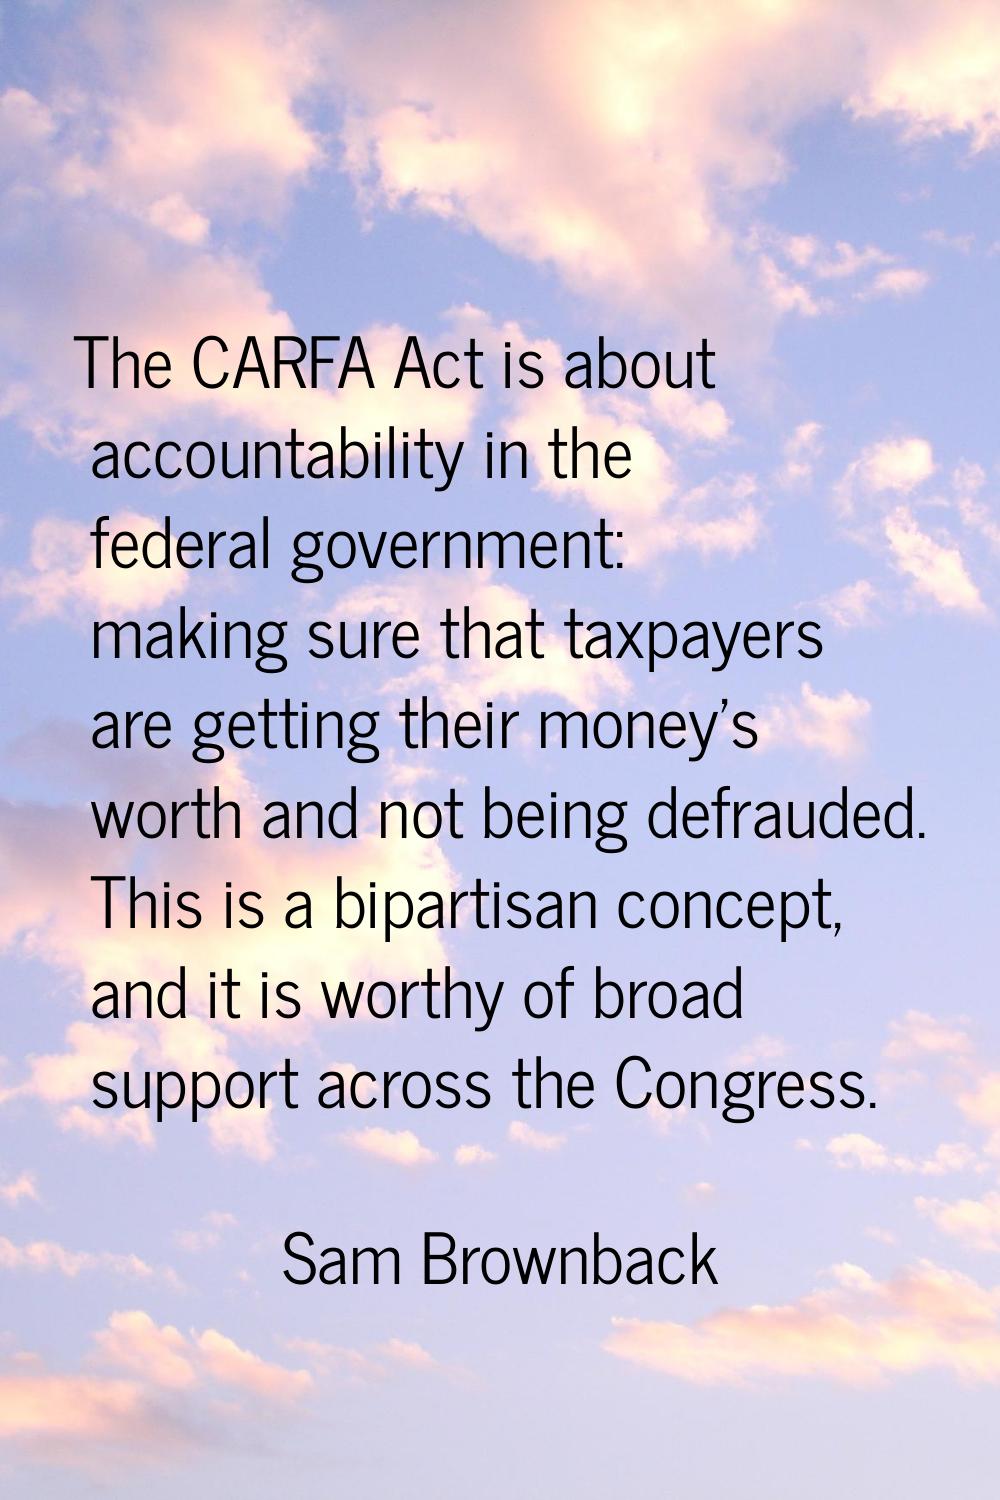 The CARFA Act is about accountability in the federal government: making sure that taxpayers are get